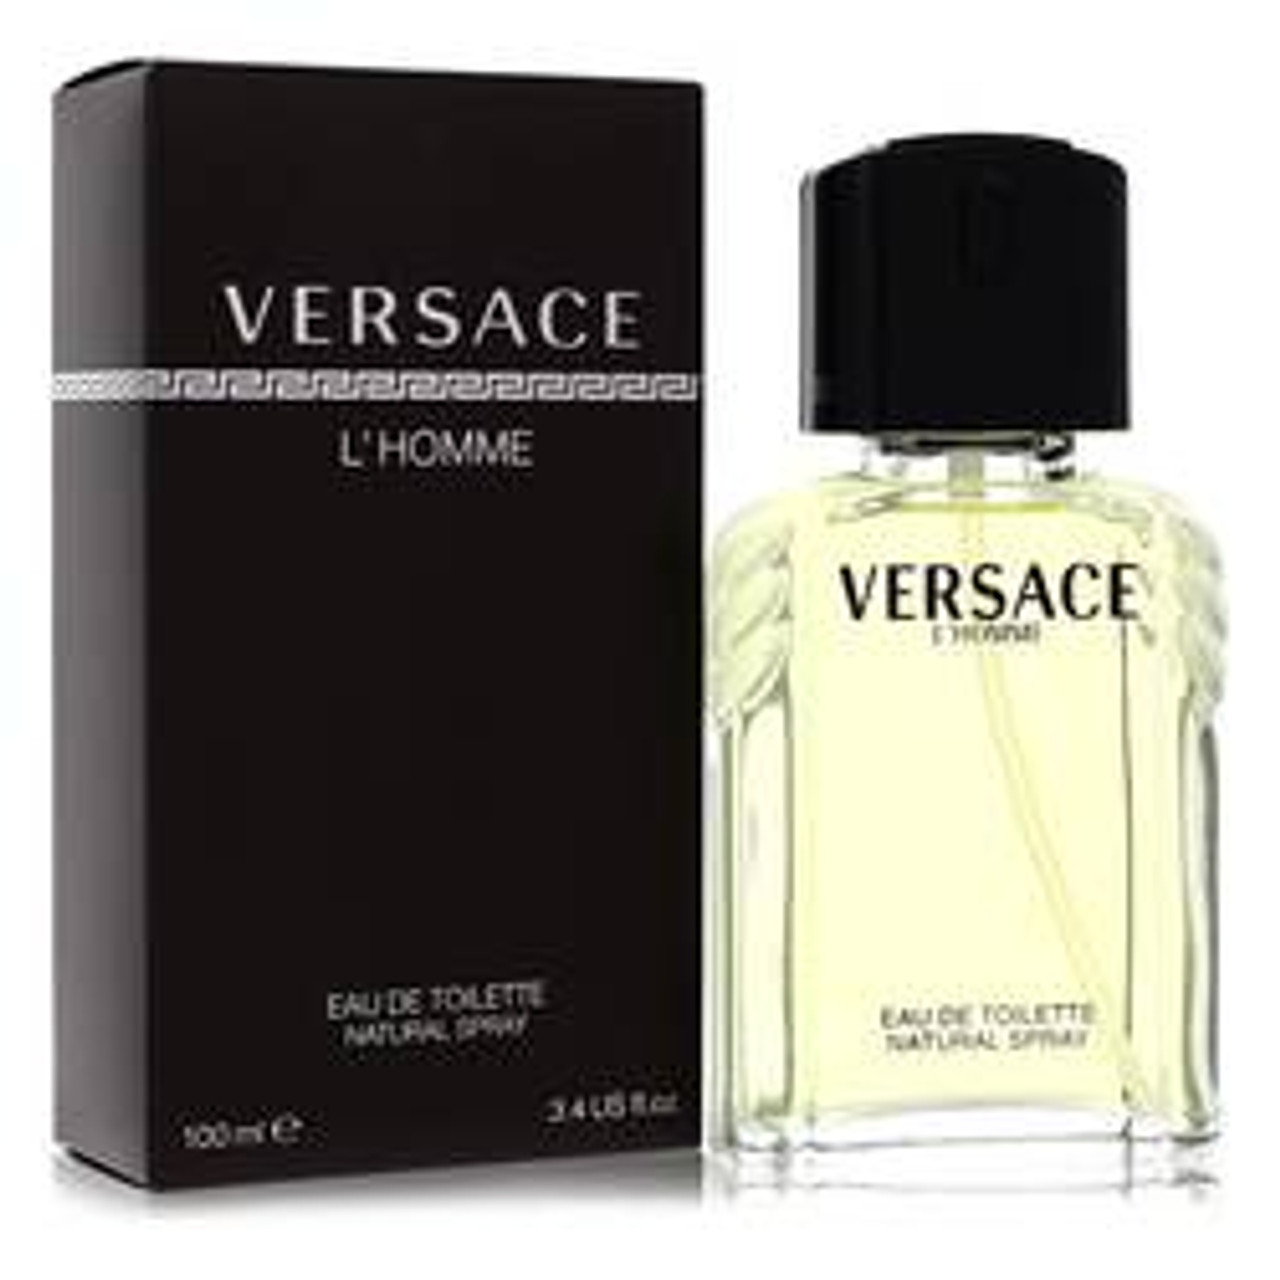 Versace L'homme Cologne By Versace Eau De Toilette Spray 3.4 oz for Men - [From 83.00 - Choose pk Qty ] - *Ships from Miami